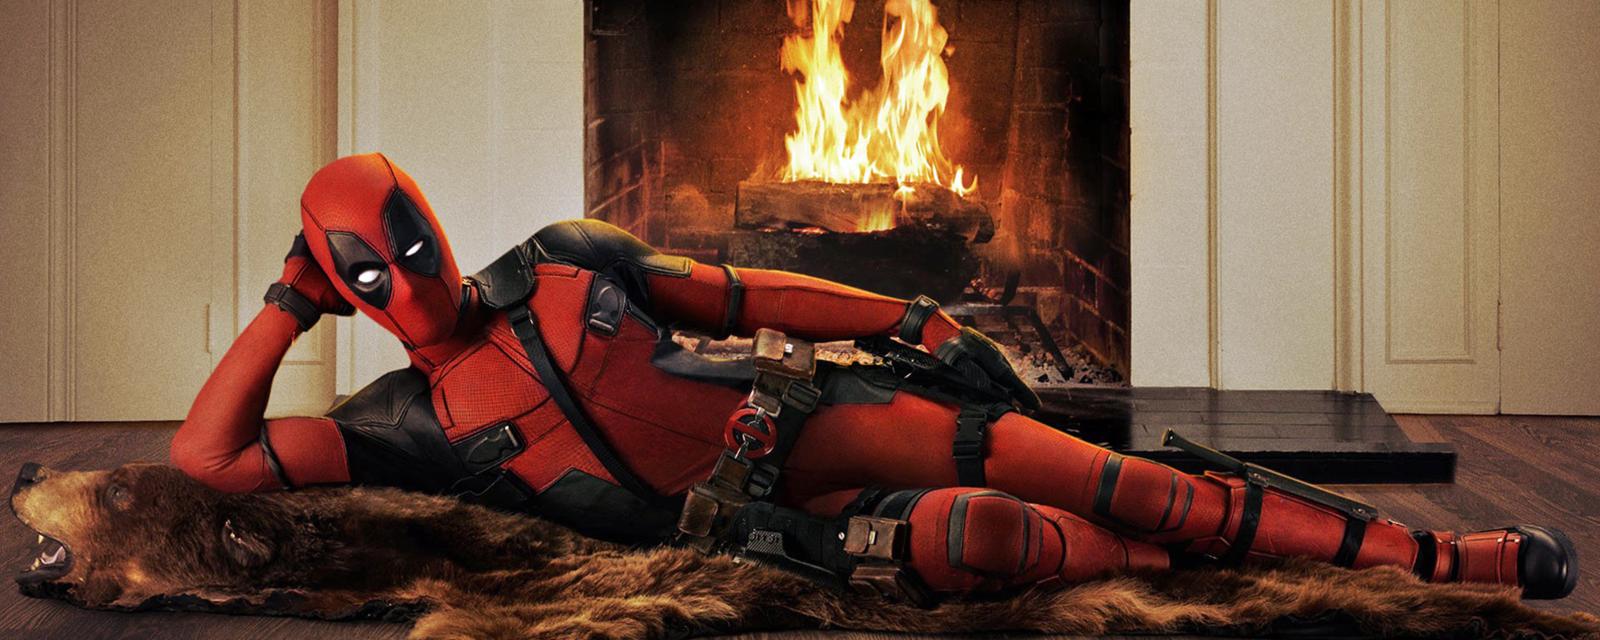 Film rewiew : Deadpool is a superhero movie for adults only